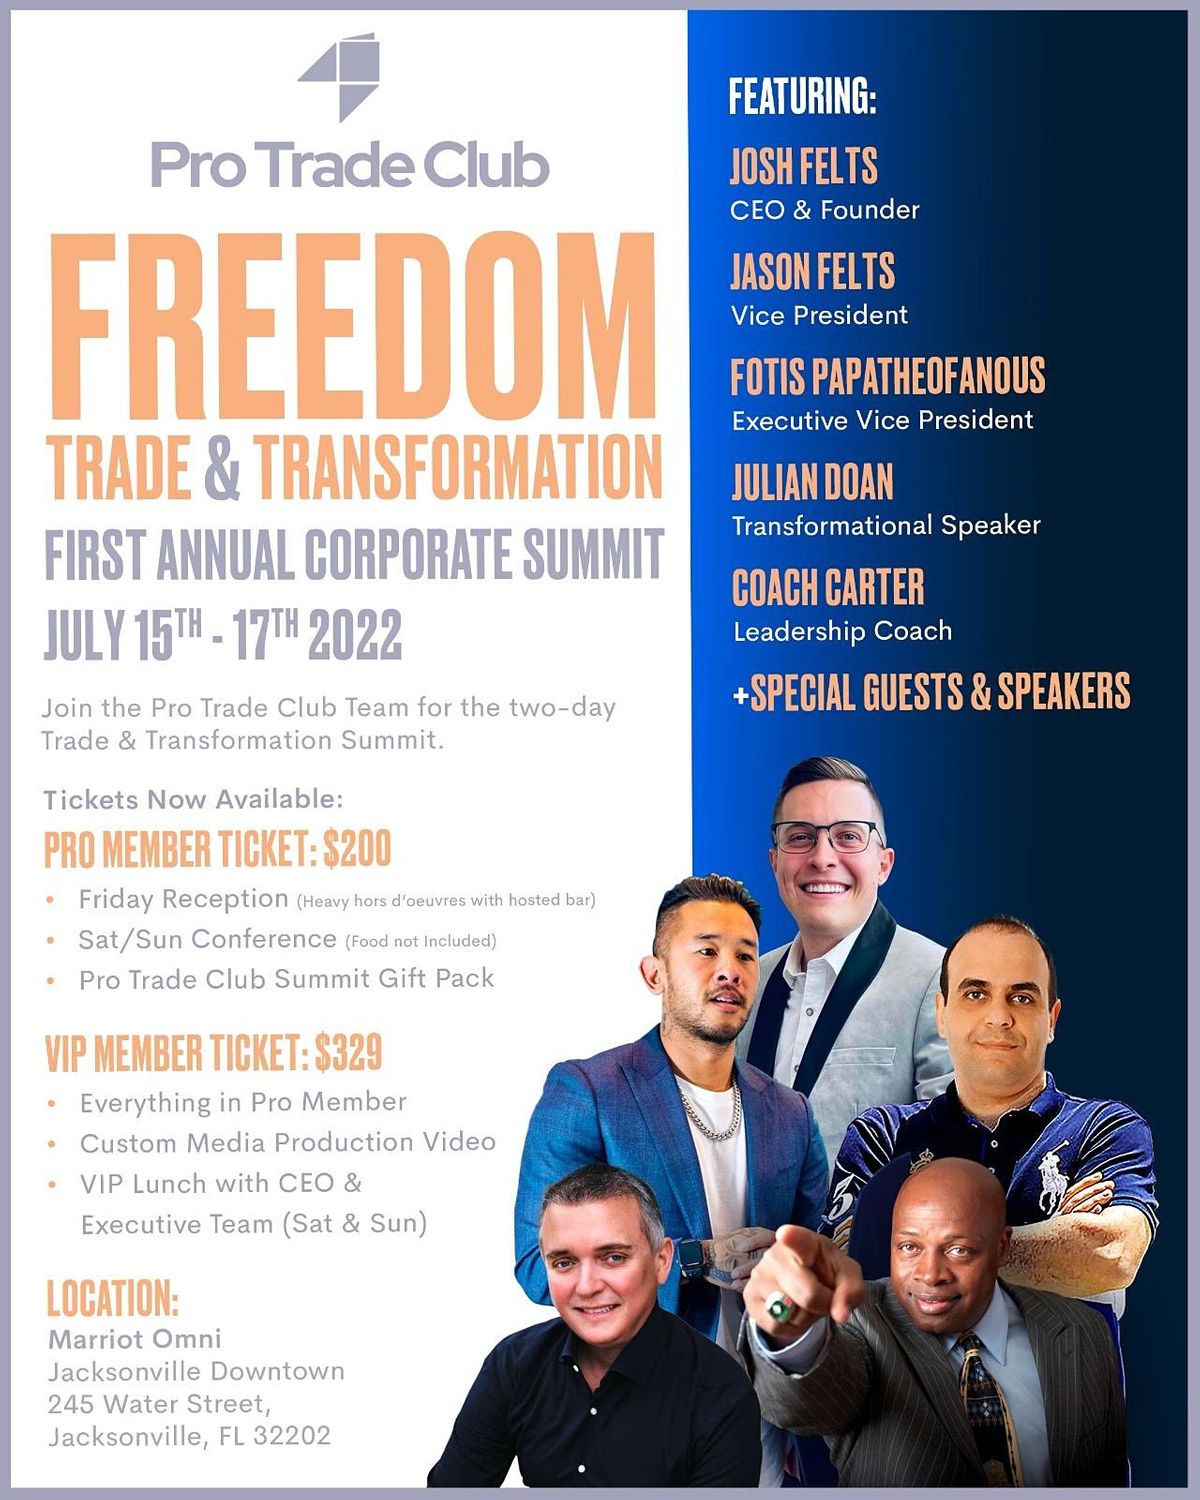 PTC FIRST ANNUAL FREEDOM TRADE & TRANSFORMATION CORPORATE FLORIDA SUMMIT